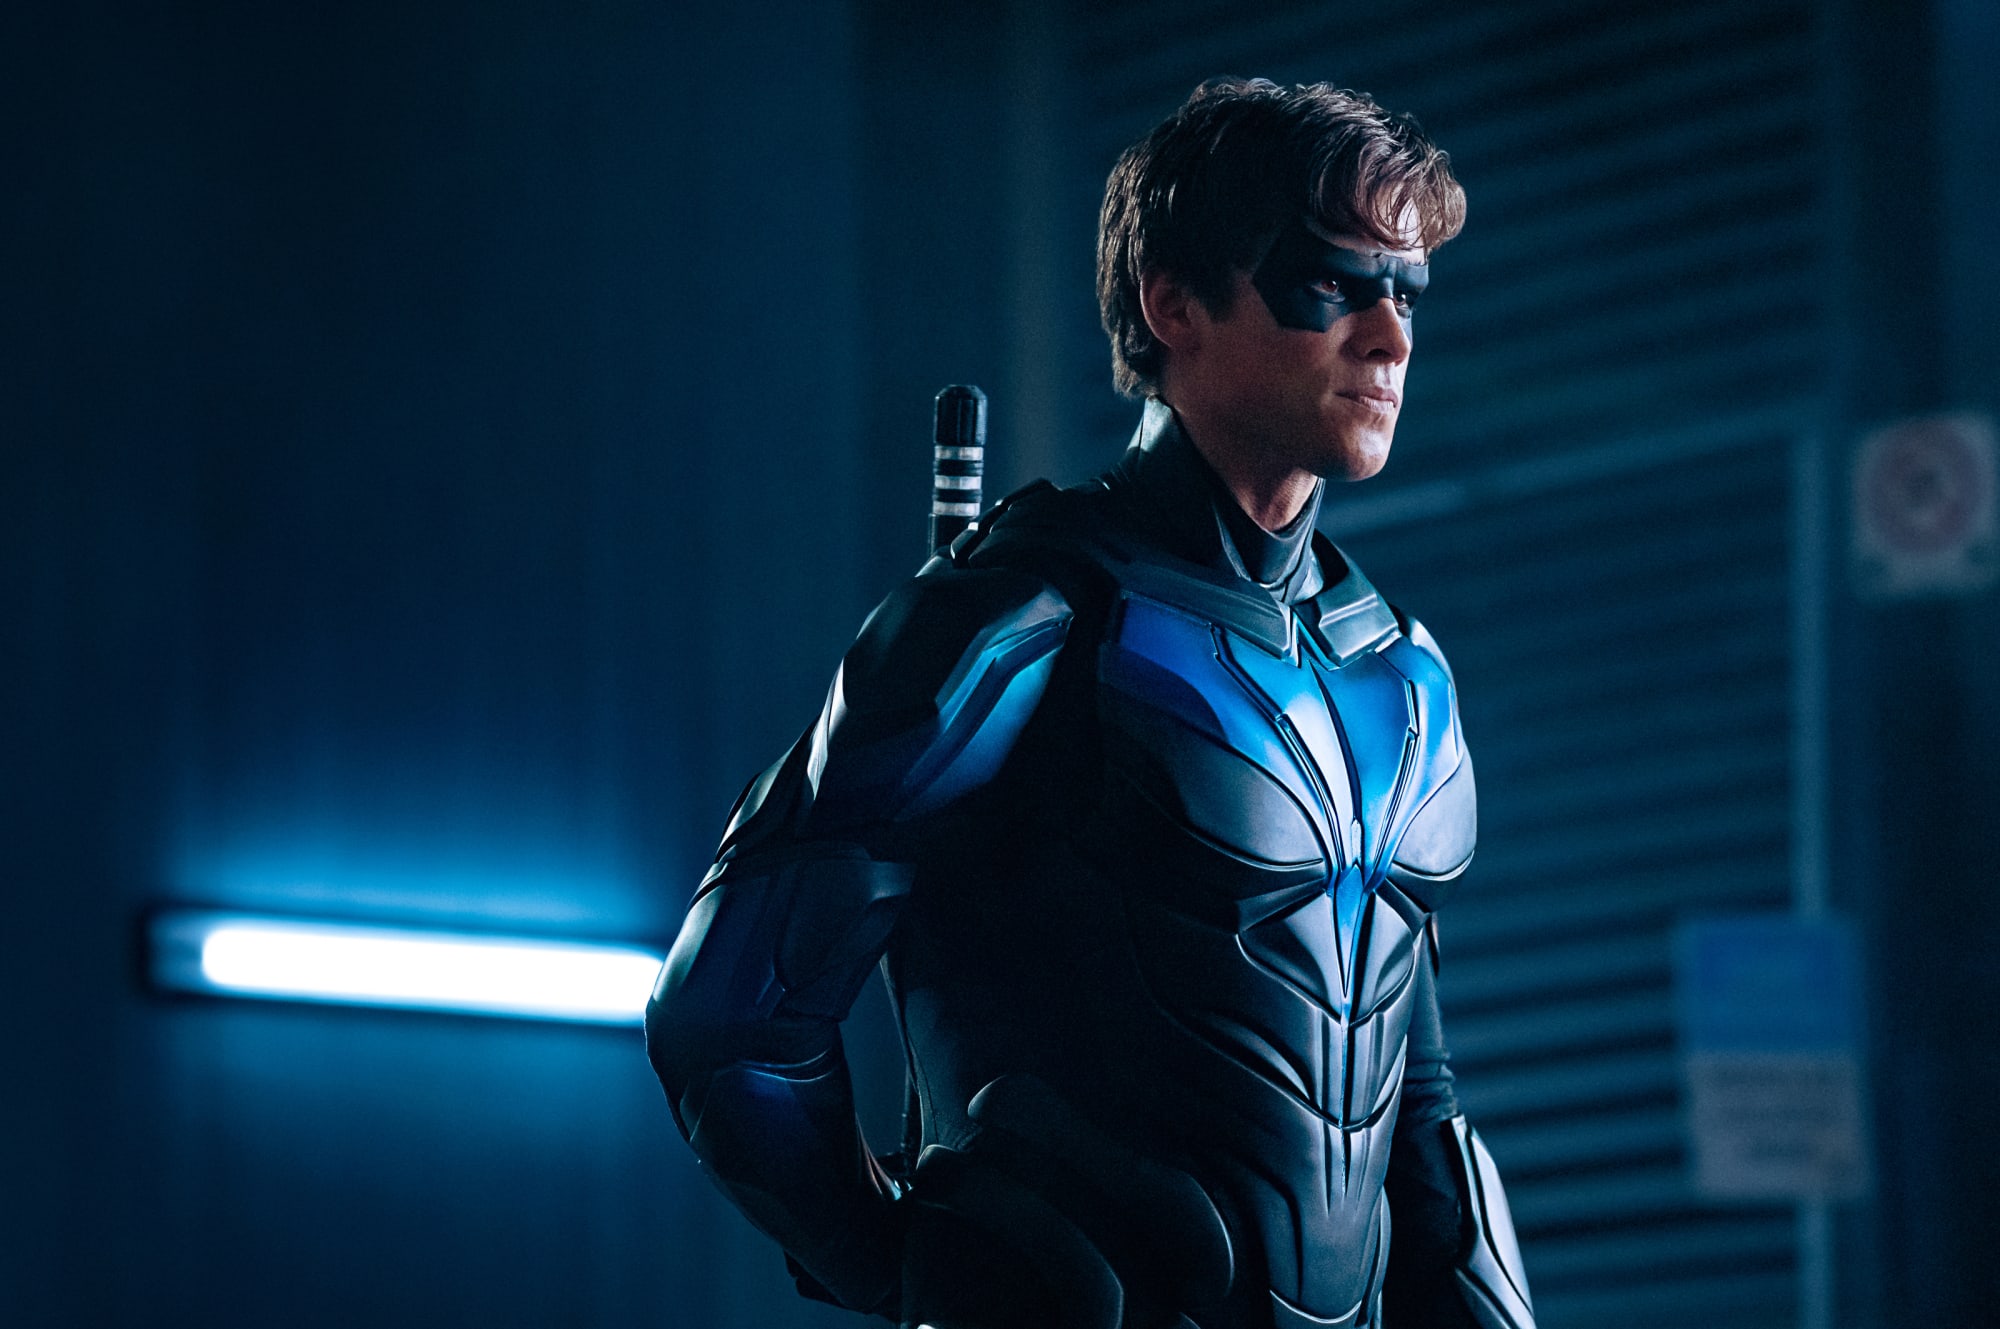 Titans season 4 is not coming to HBO Max in summer 2022